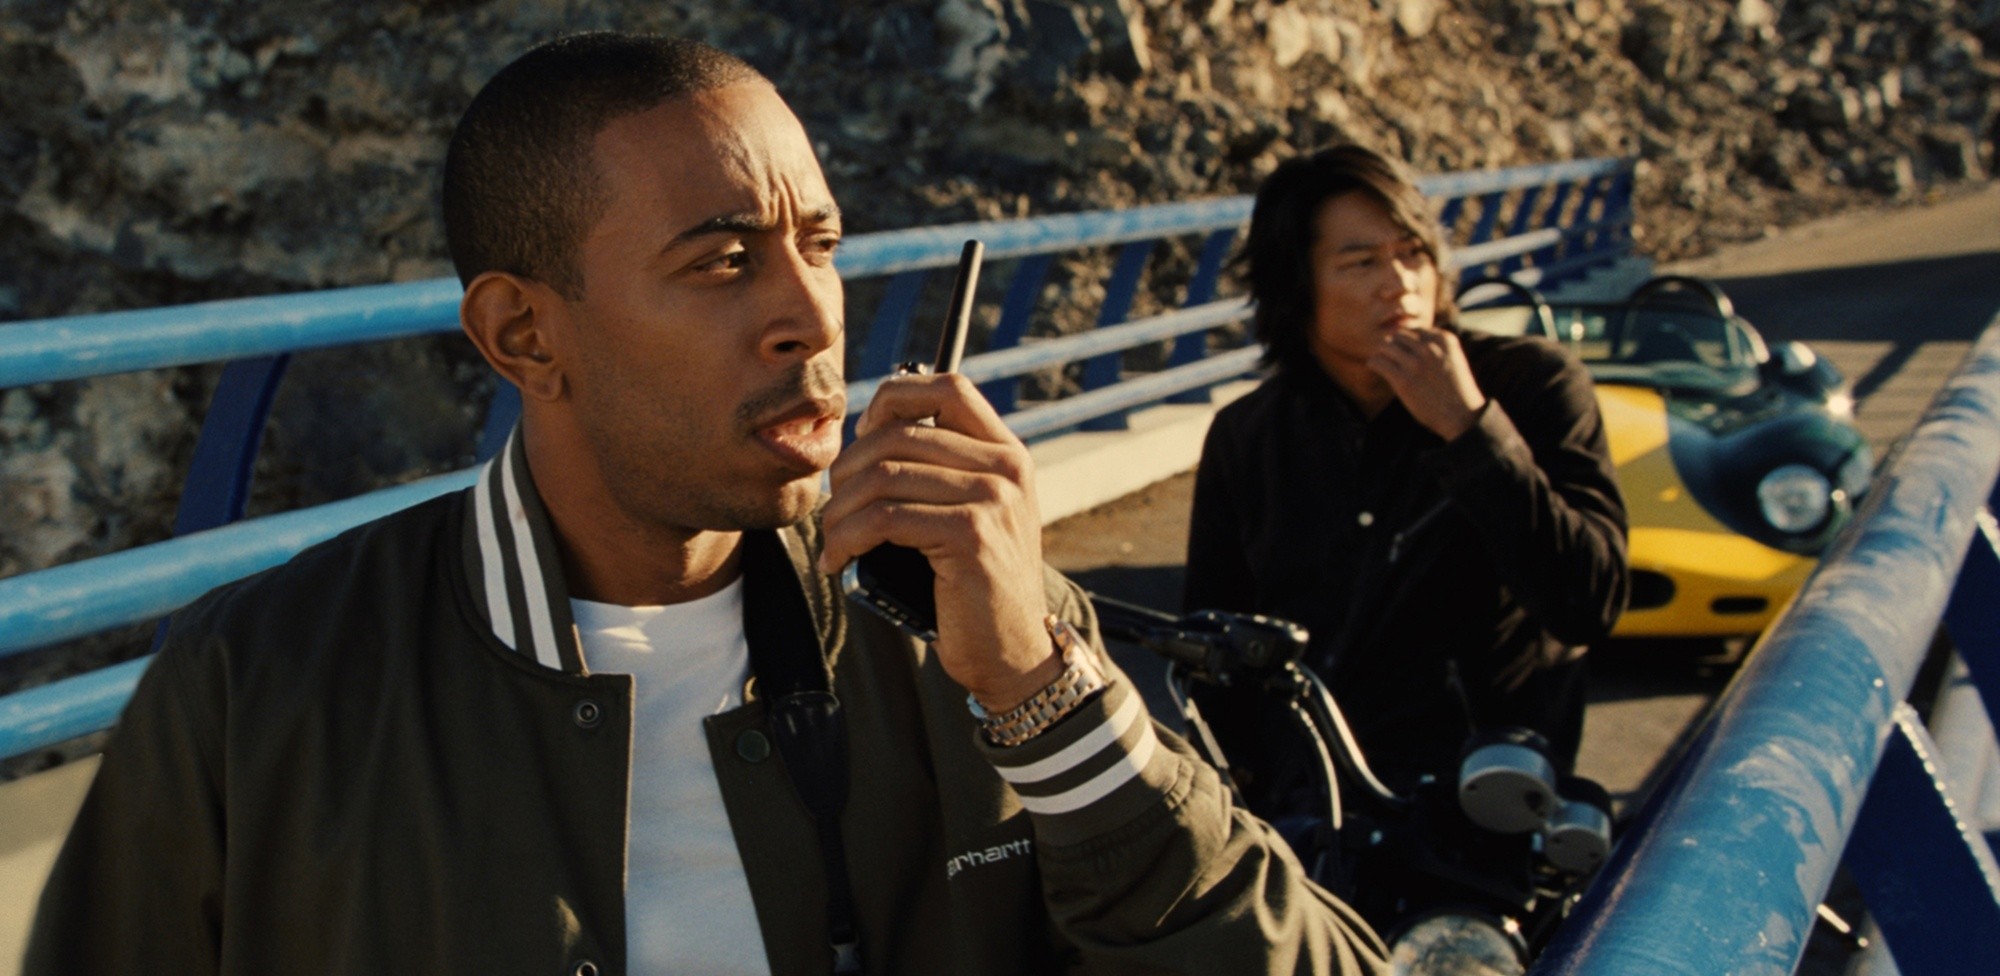 udacris stars as Tej Parker and Sung Kang stars as Han in Universal Pictures' Fast and Furious 6 (2013)